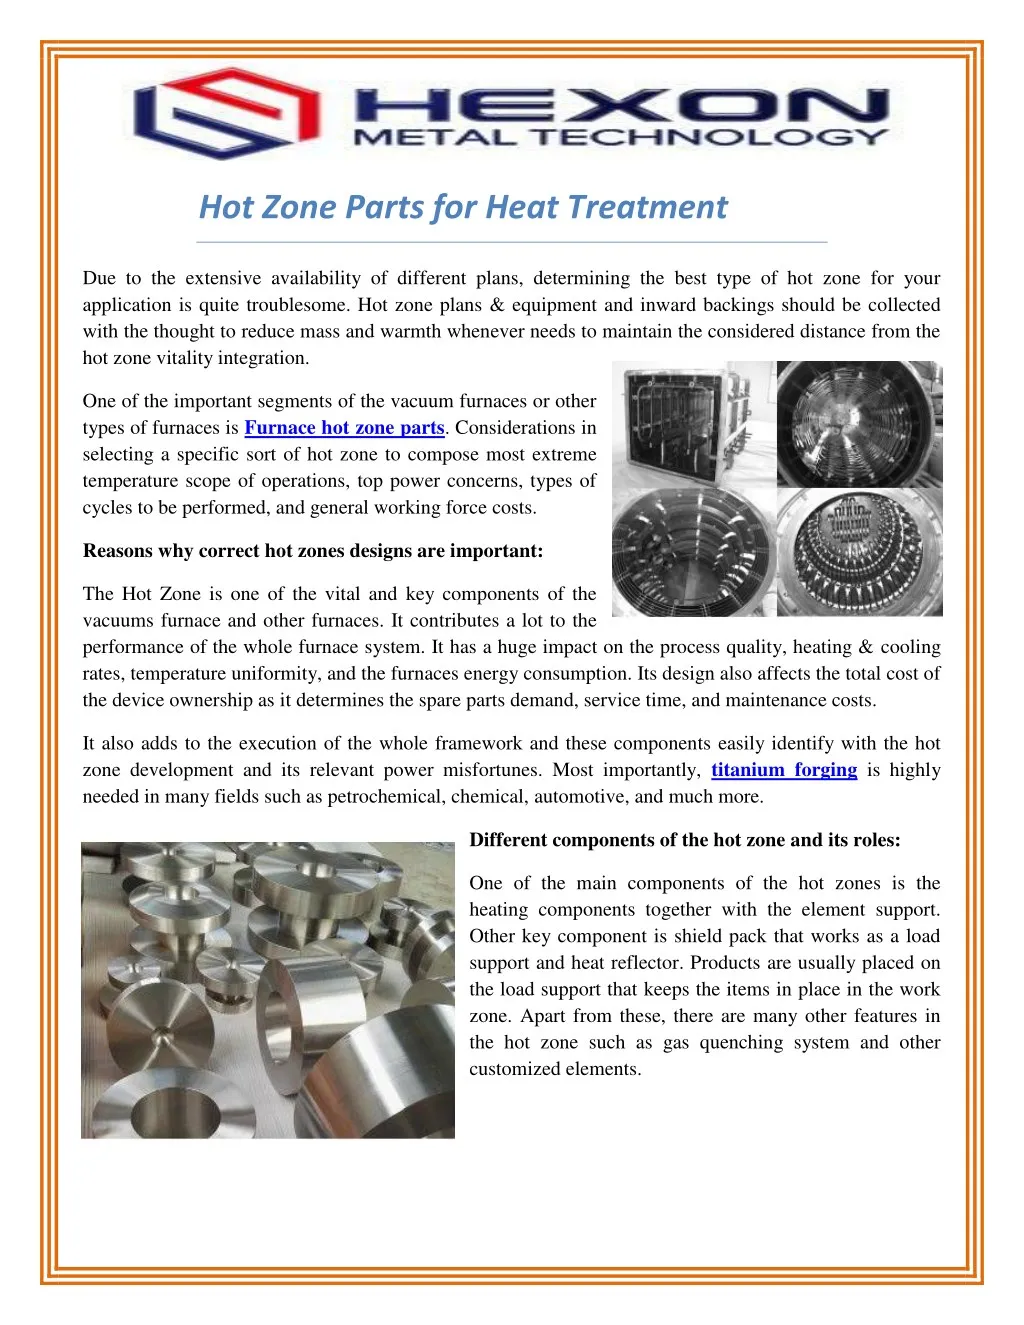 hot zone parts for heat treatment